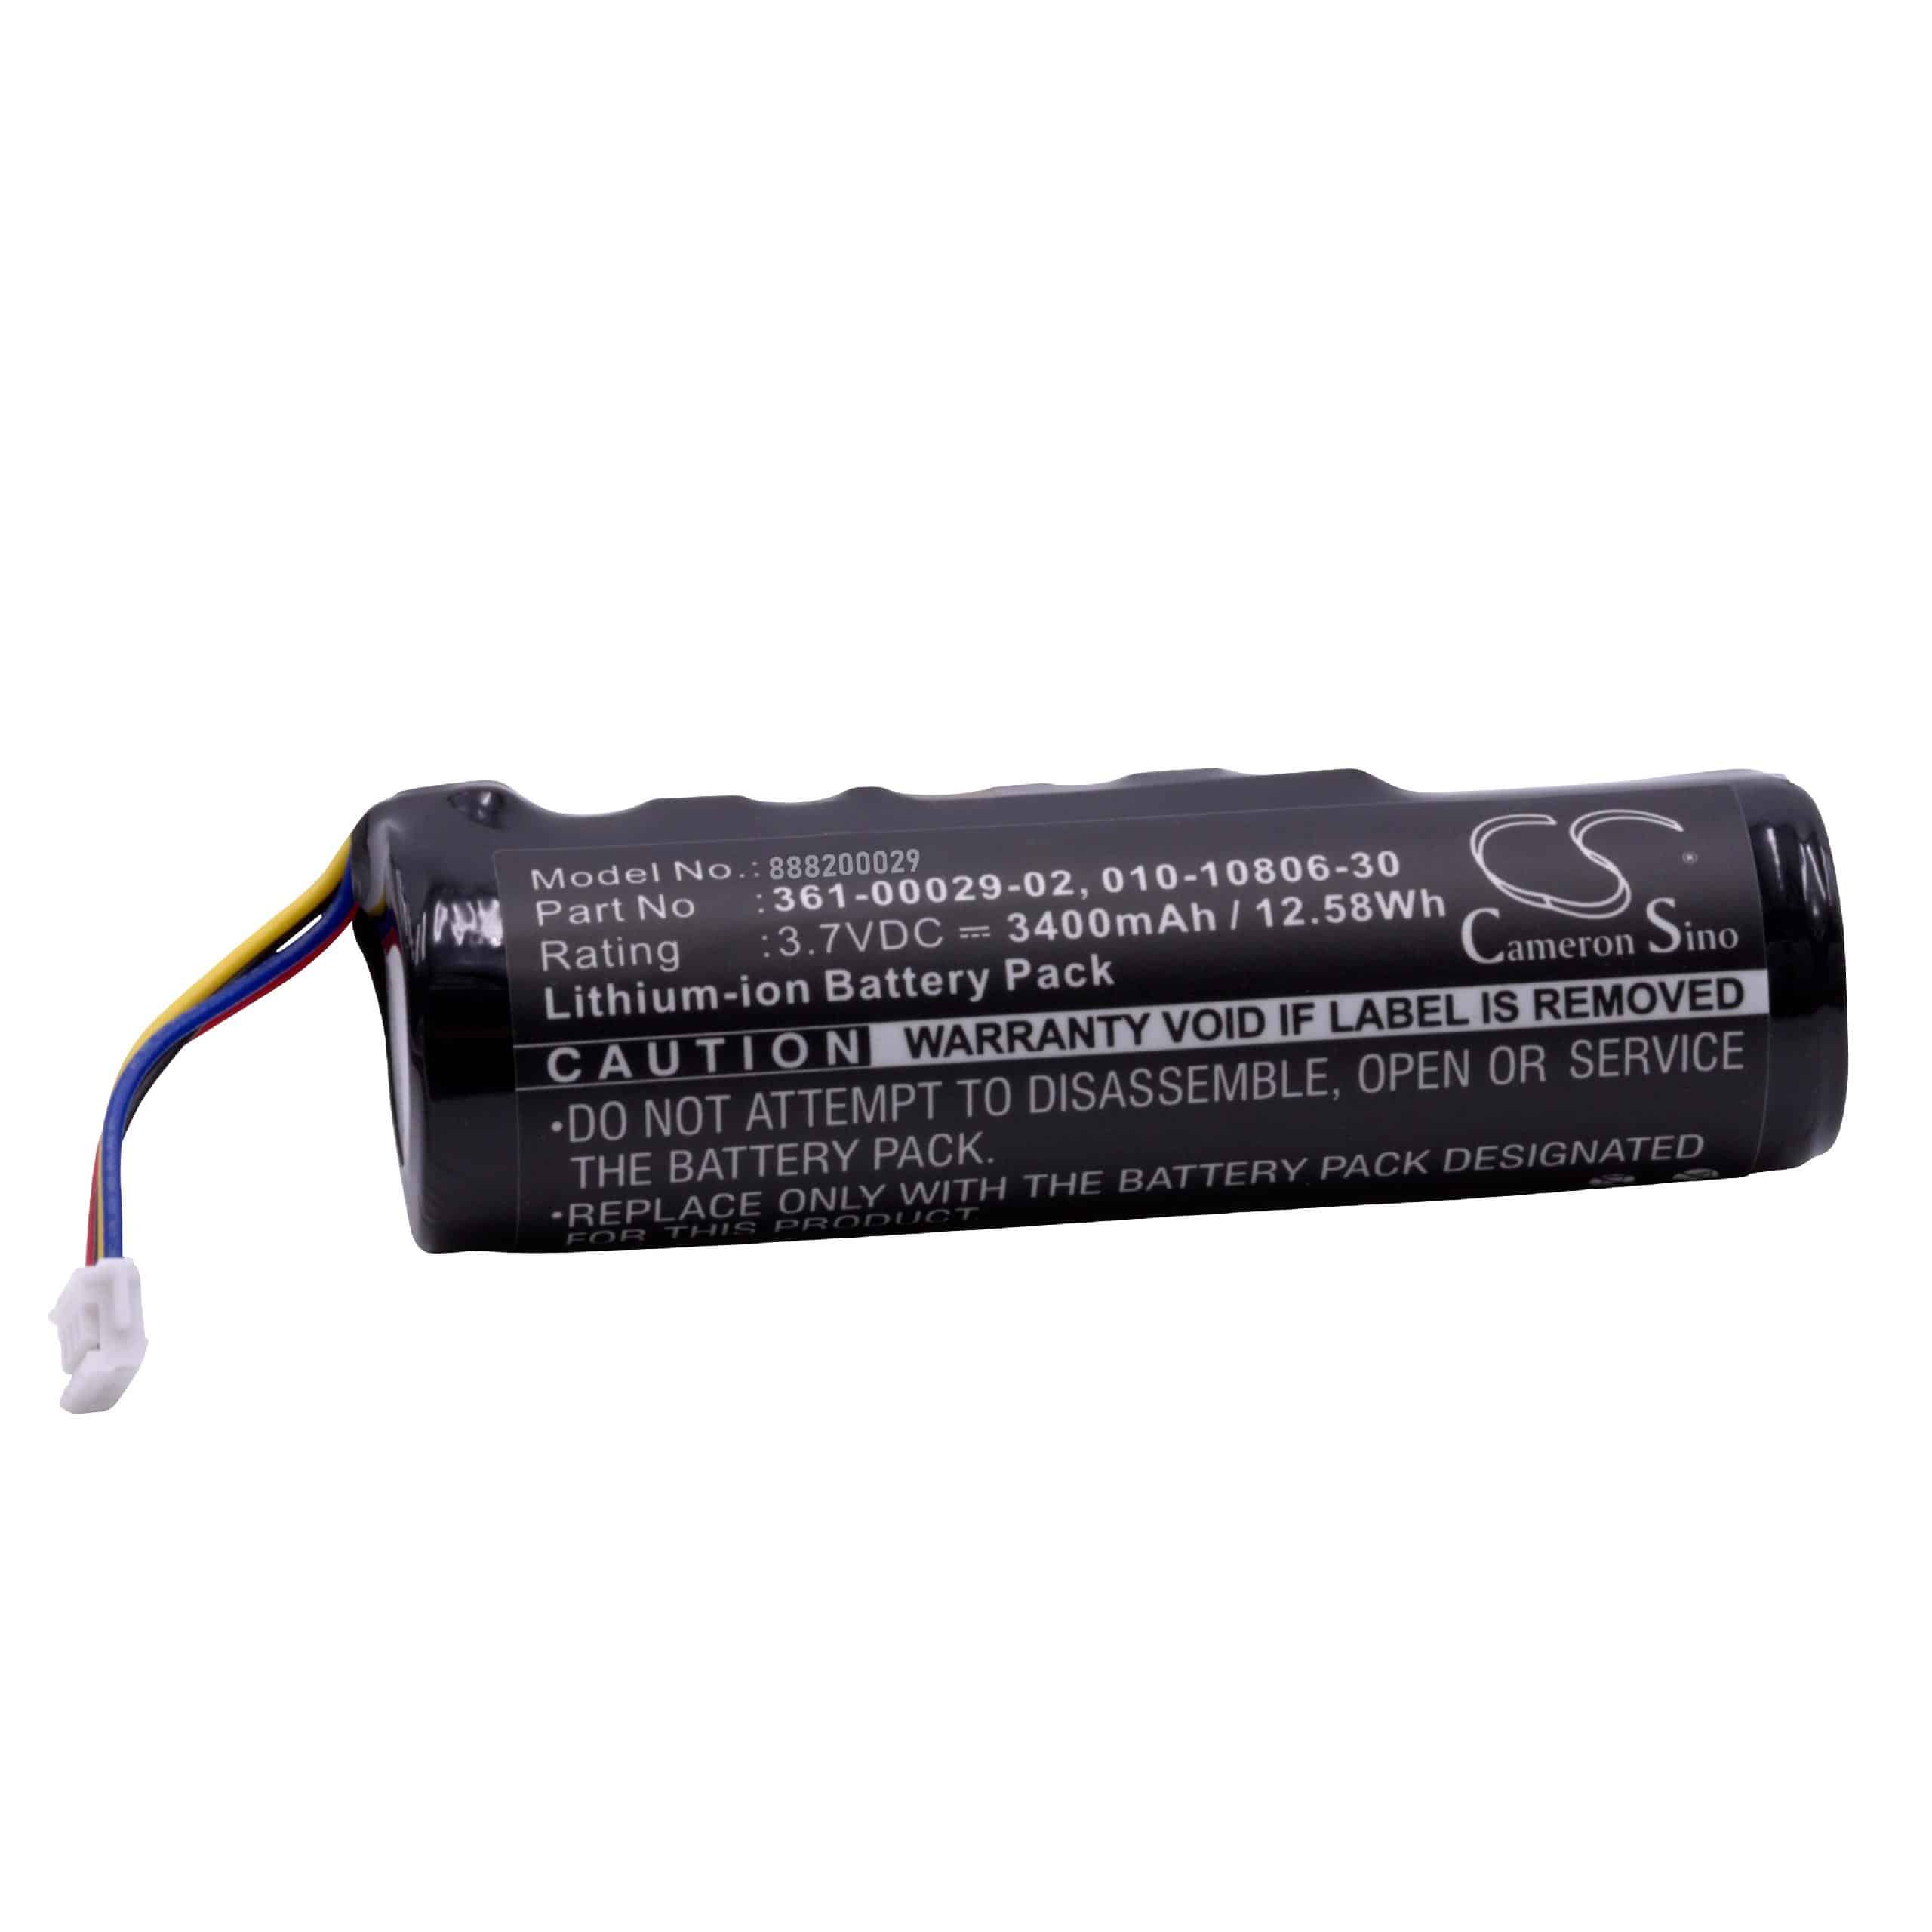 Dog Trainer Battery Replacement for Garmin 361-00029-02, 010-11828-03, 010-10806-30 - 3400mAh 3.7V Li-Ion